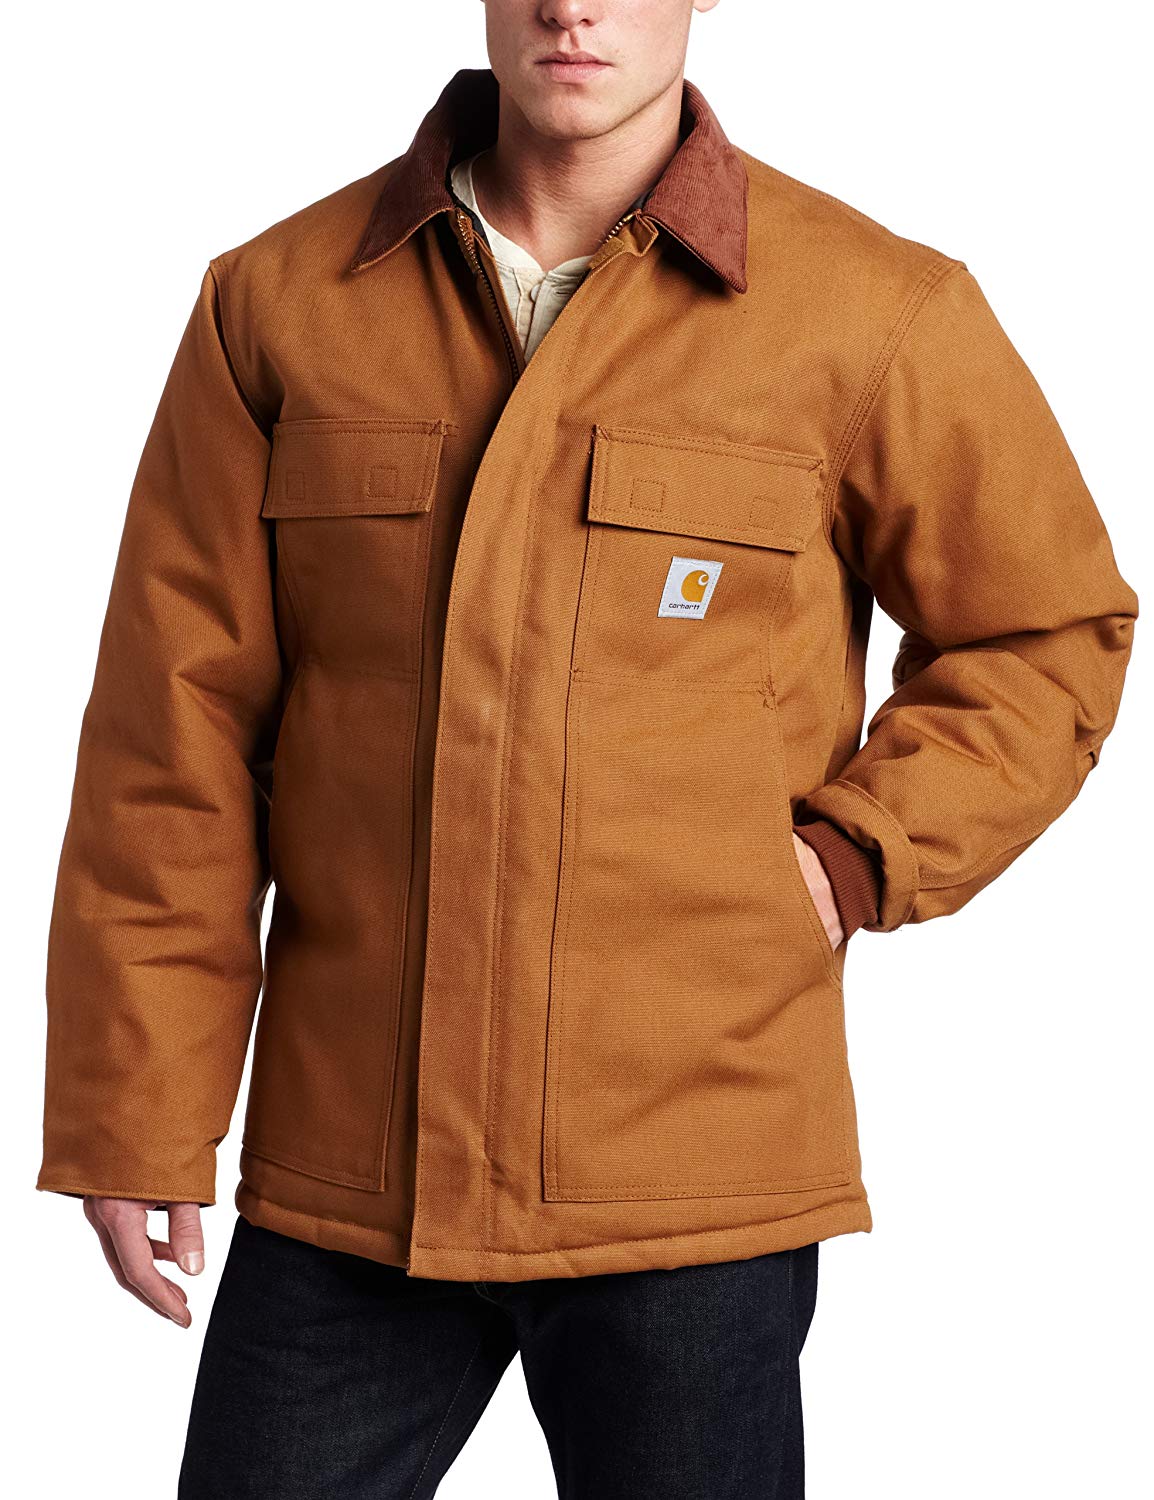 45 Ways To Style Carhartt Jacket - Get Creative For A Great Look